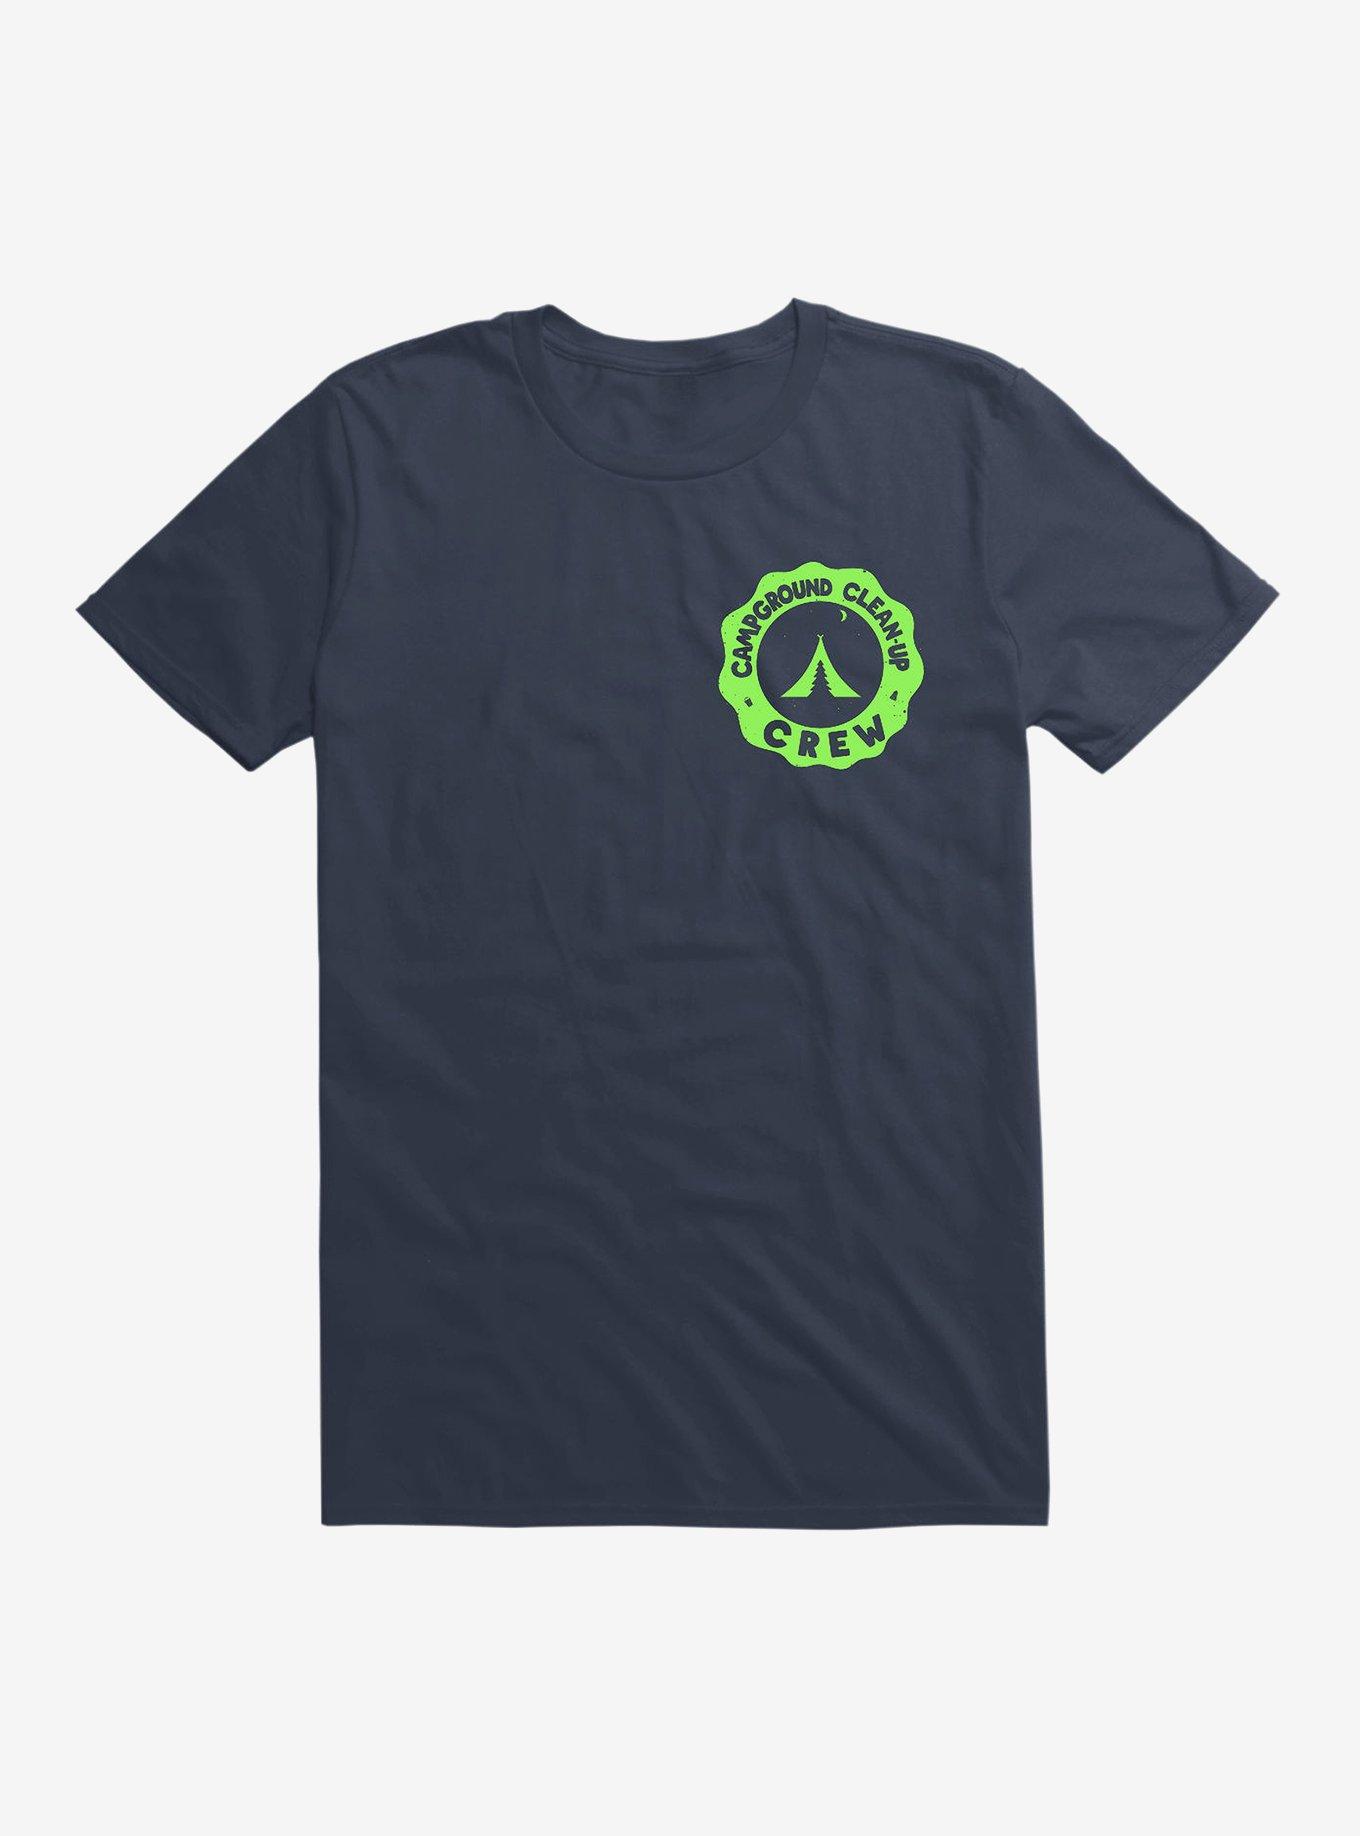 Campground Cleanup Crew T-Shirt, NAVY, hi-res